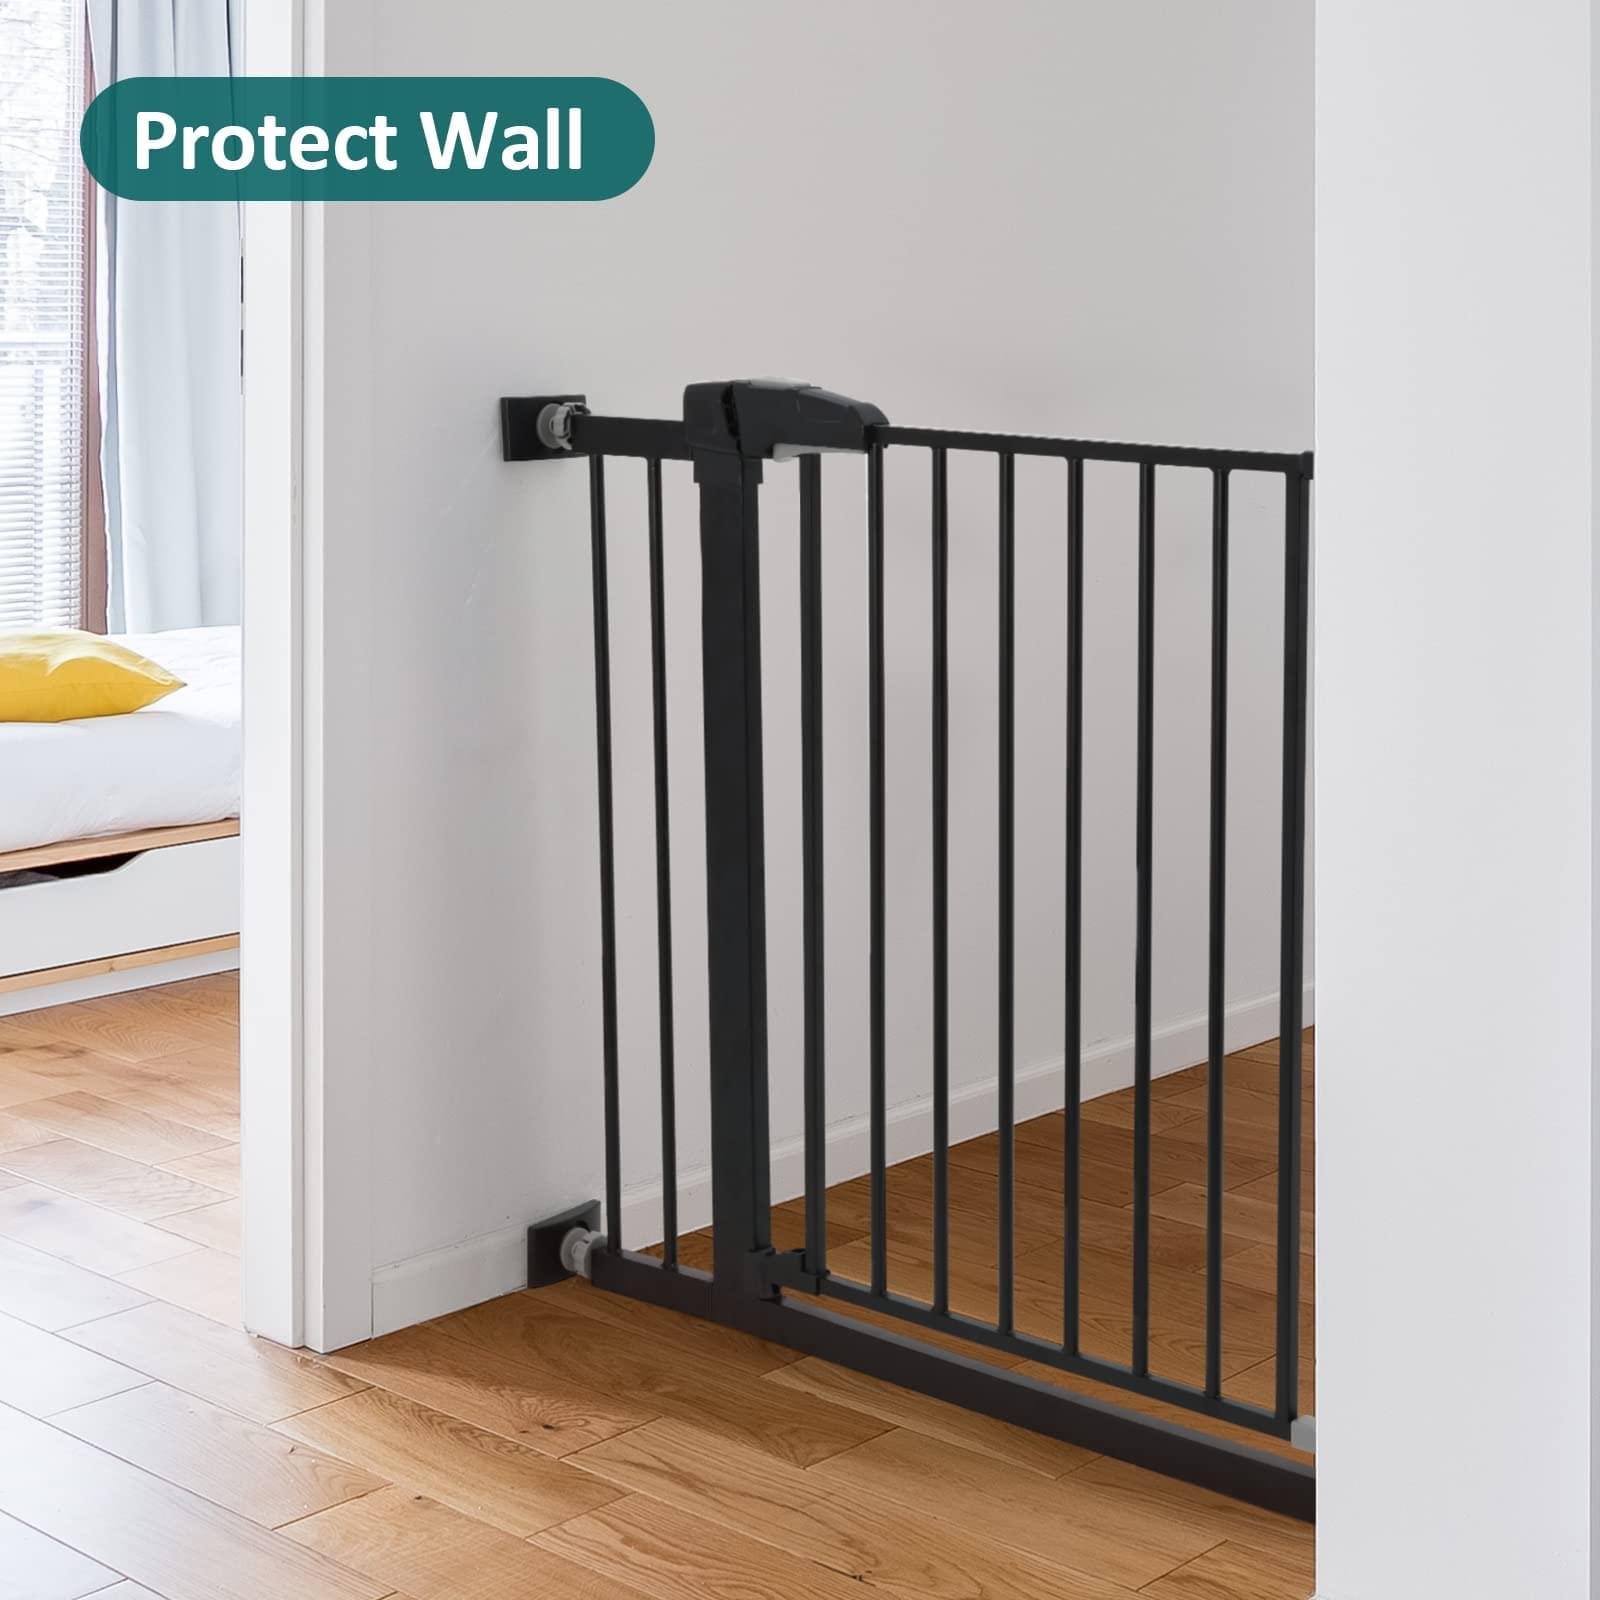 Babelio Baby Gate Wall Protectors, 4 Pack Wall Cups for Child Gate, Black - babeliobaby